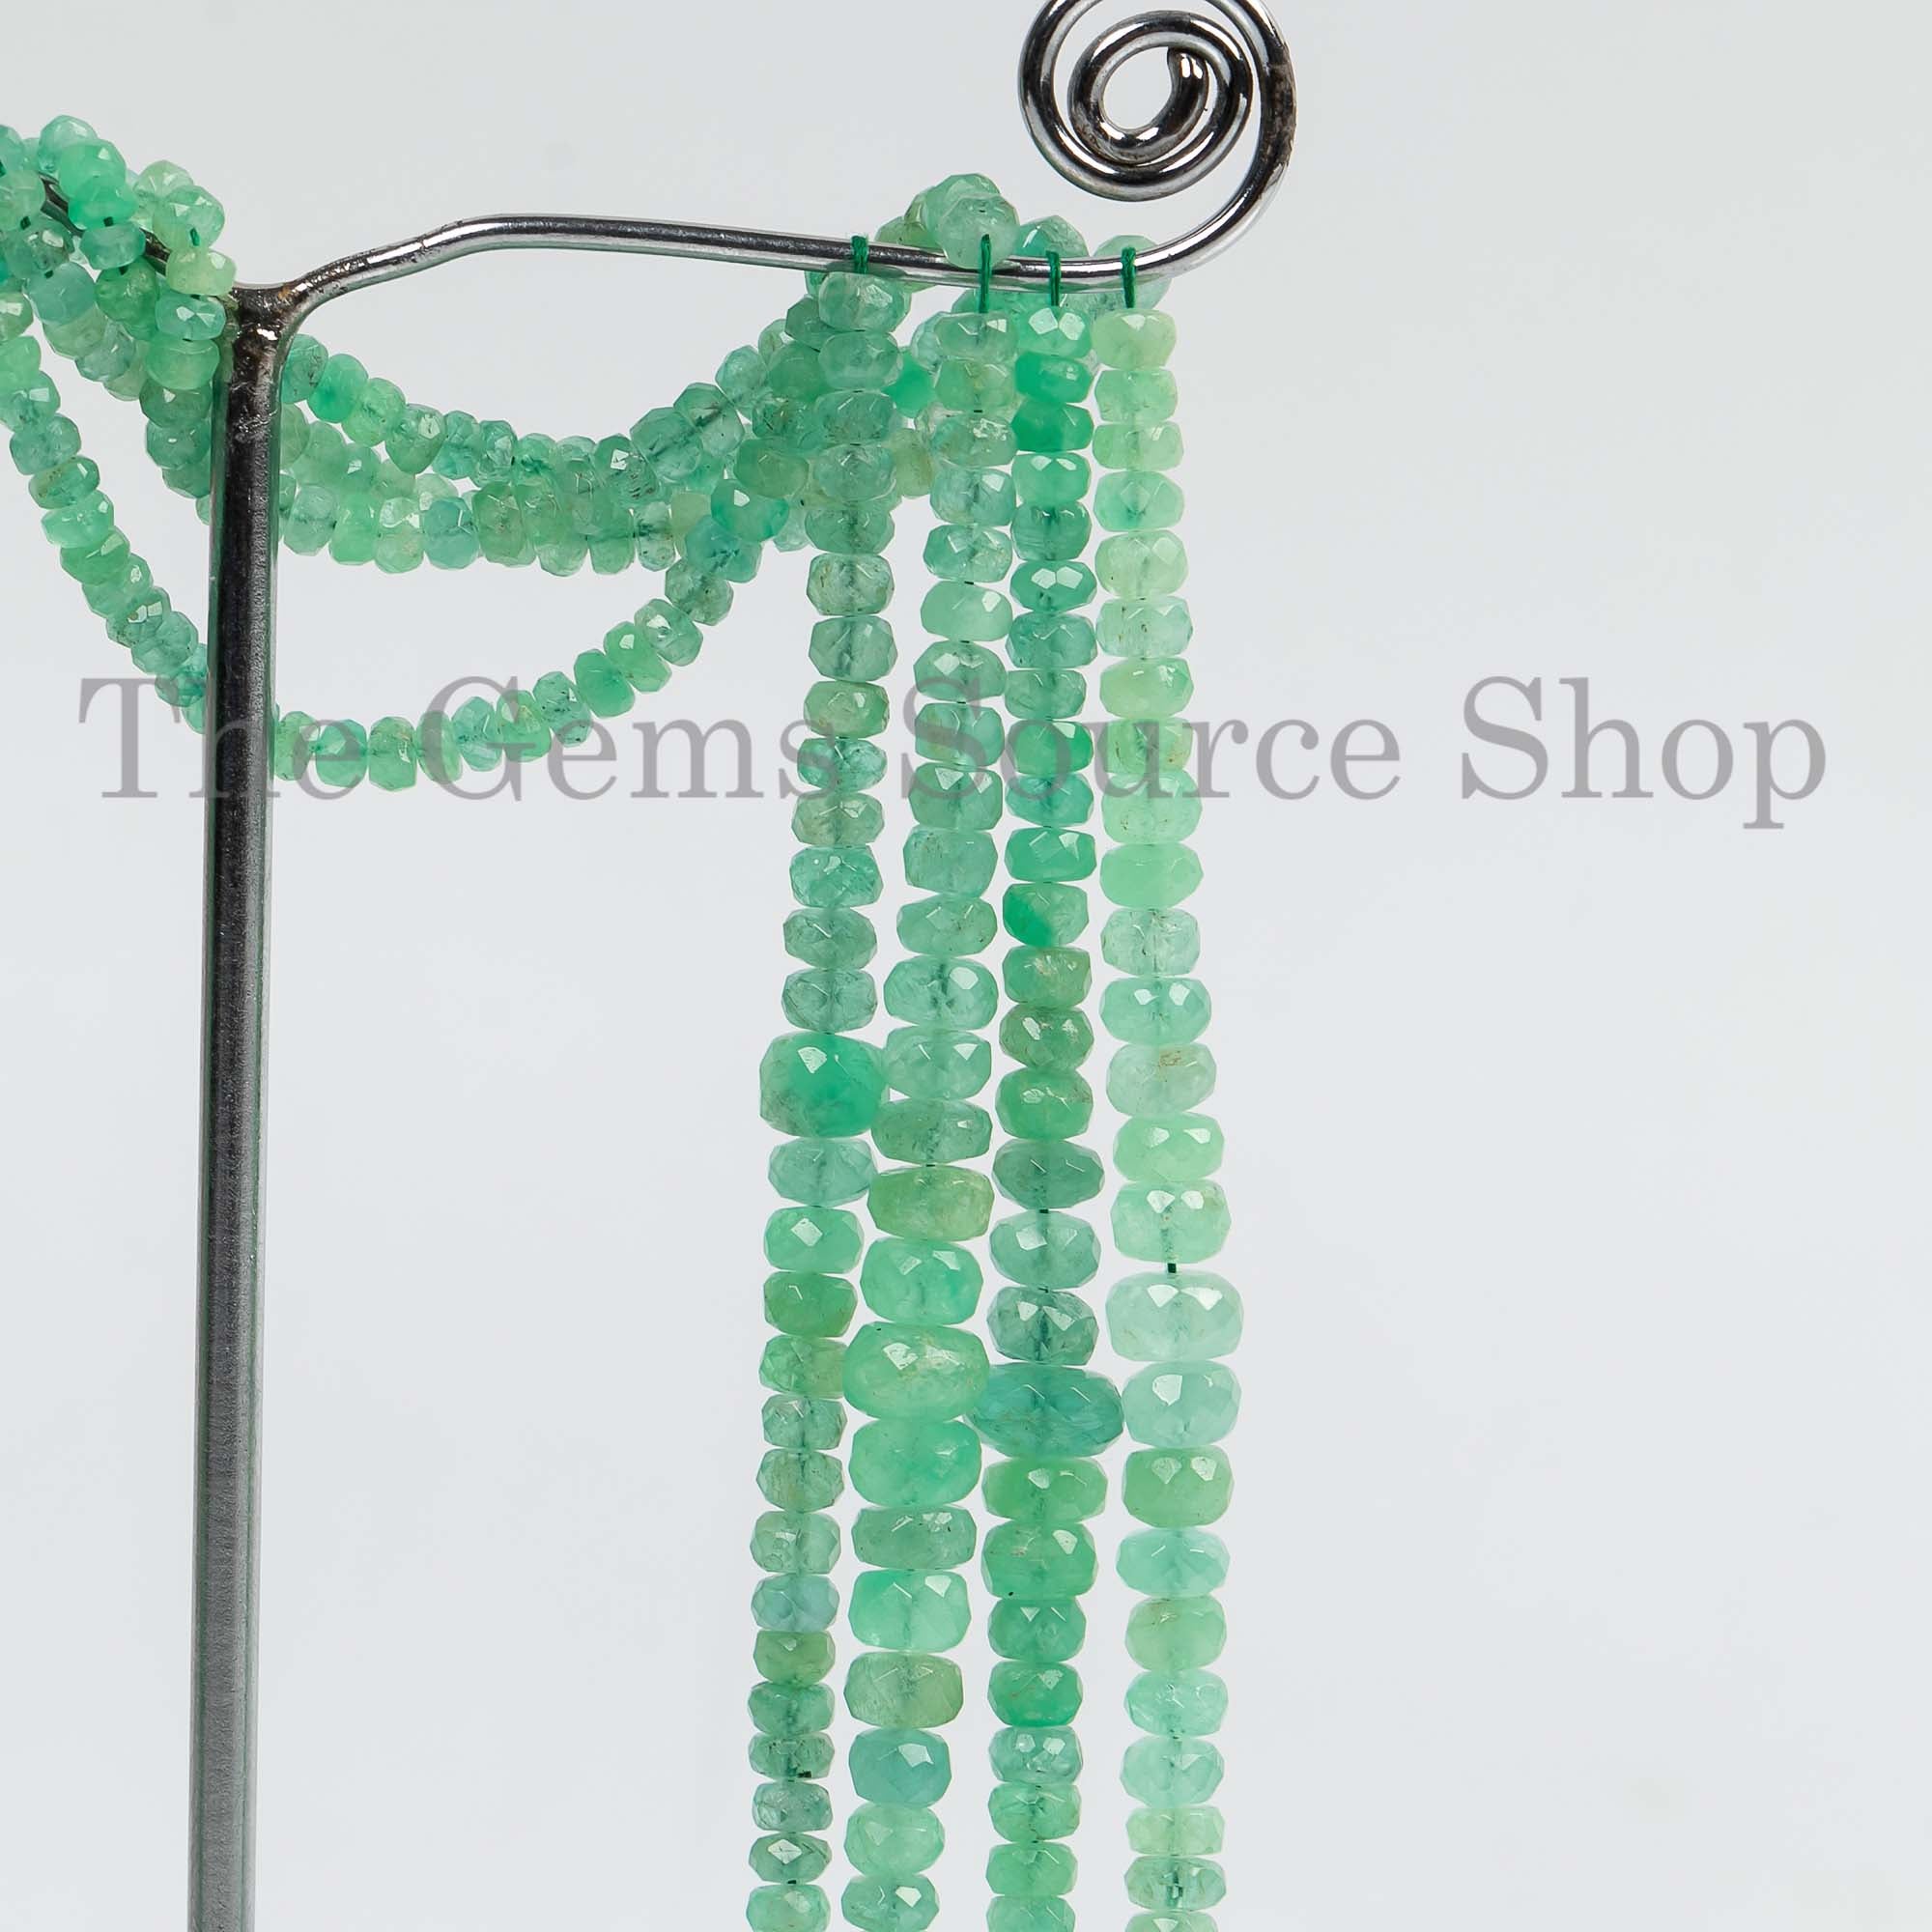 Emerald Faceted Rondelle, Natural Emerald Beads, 2.5-5mm Emerald Rondelle Beads, Faceted Beads, Gemstone Rondelle Beads, Jewelry Making